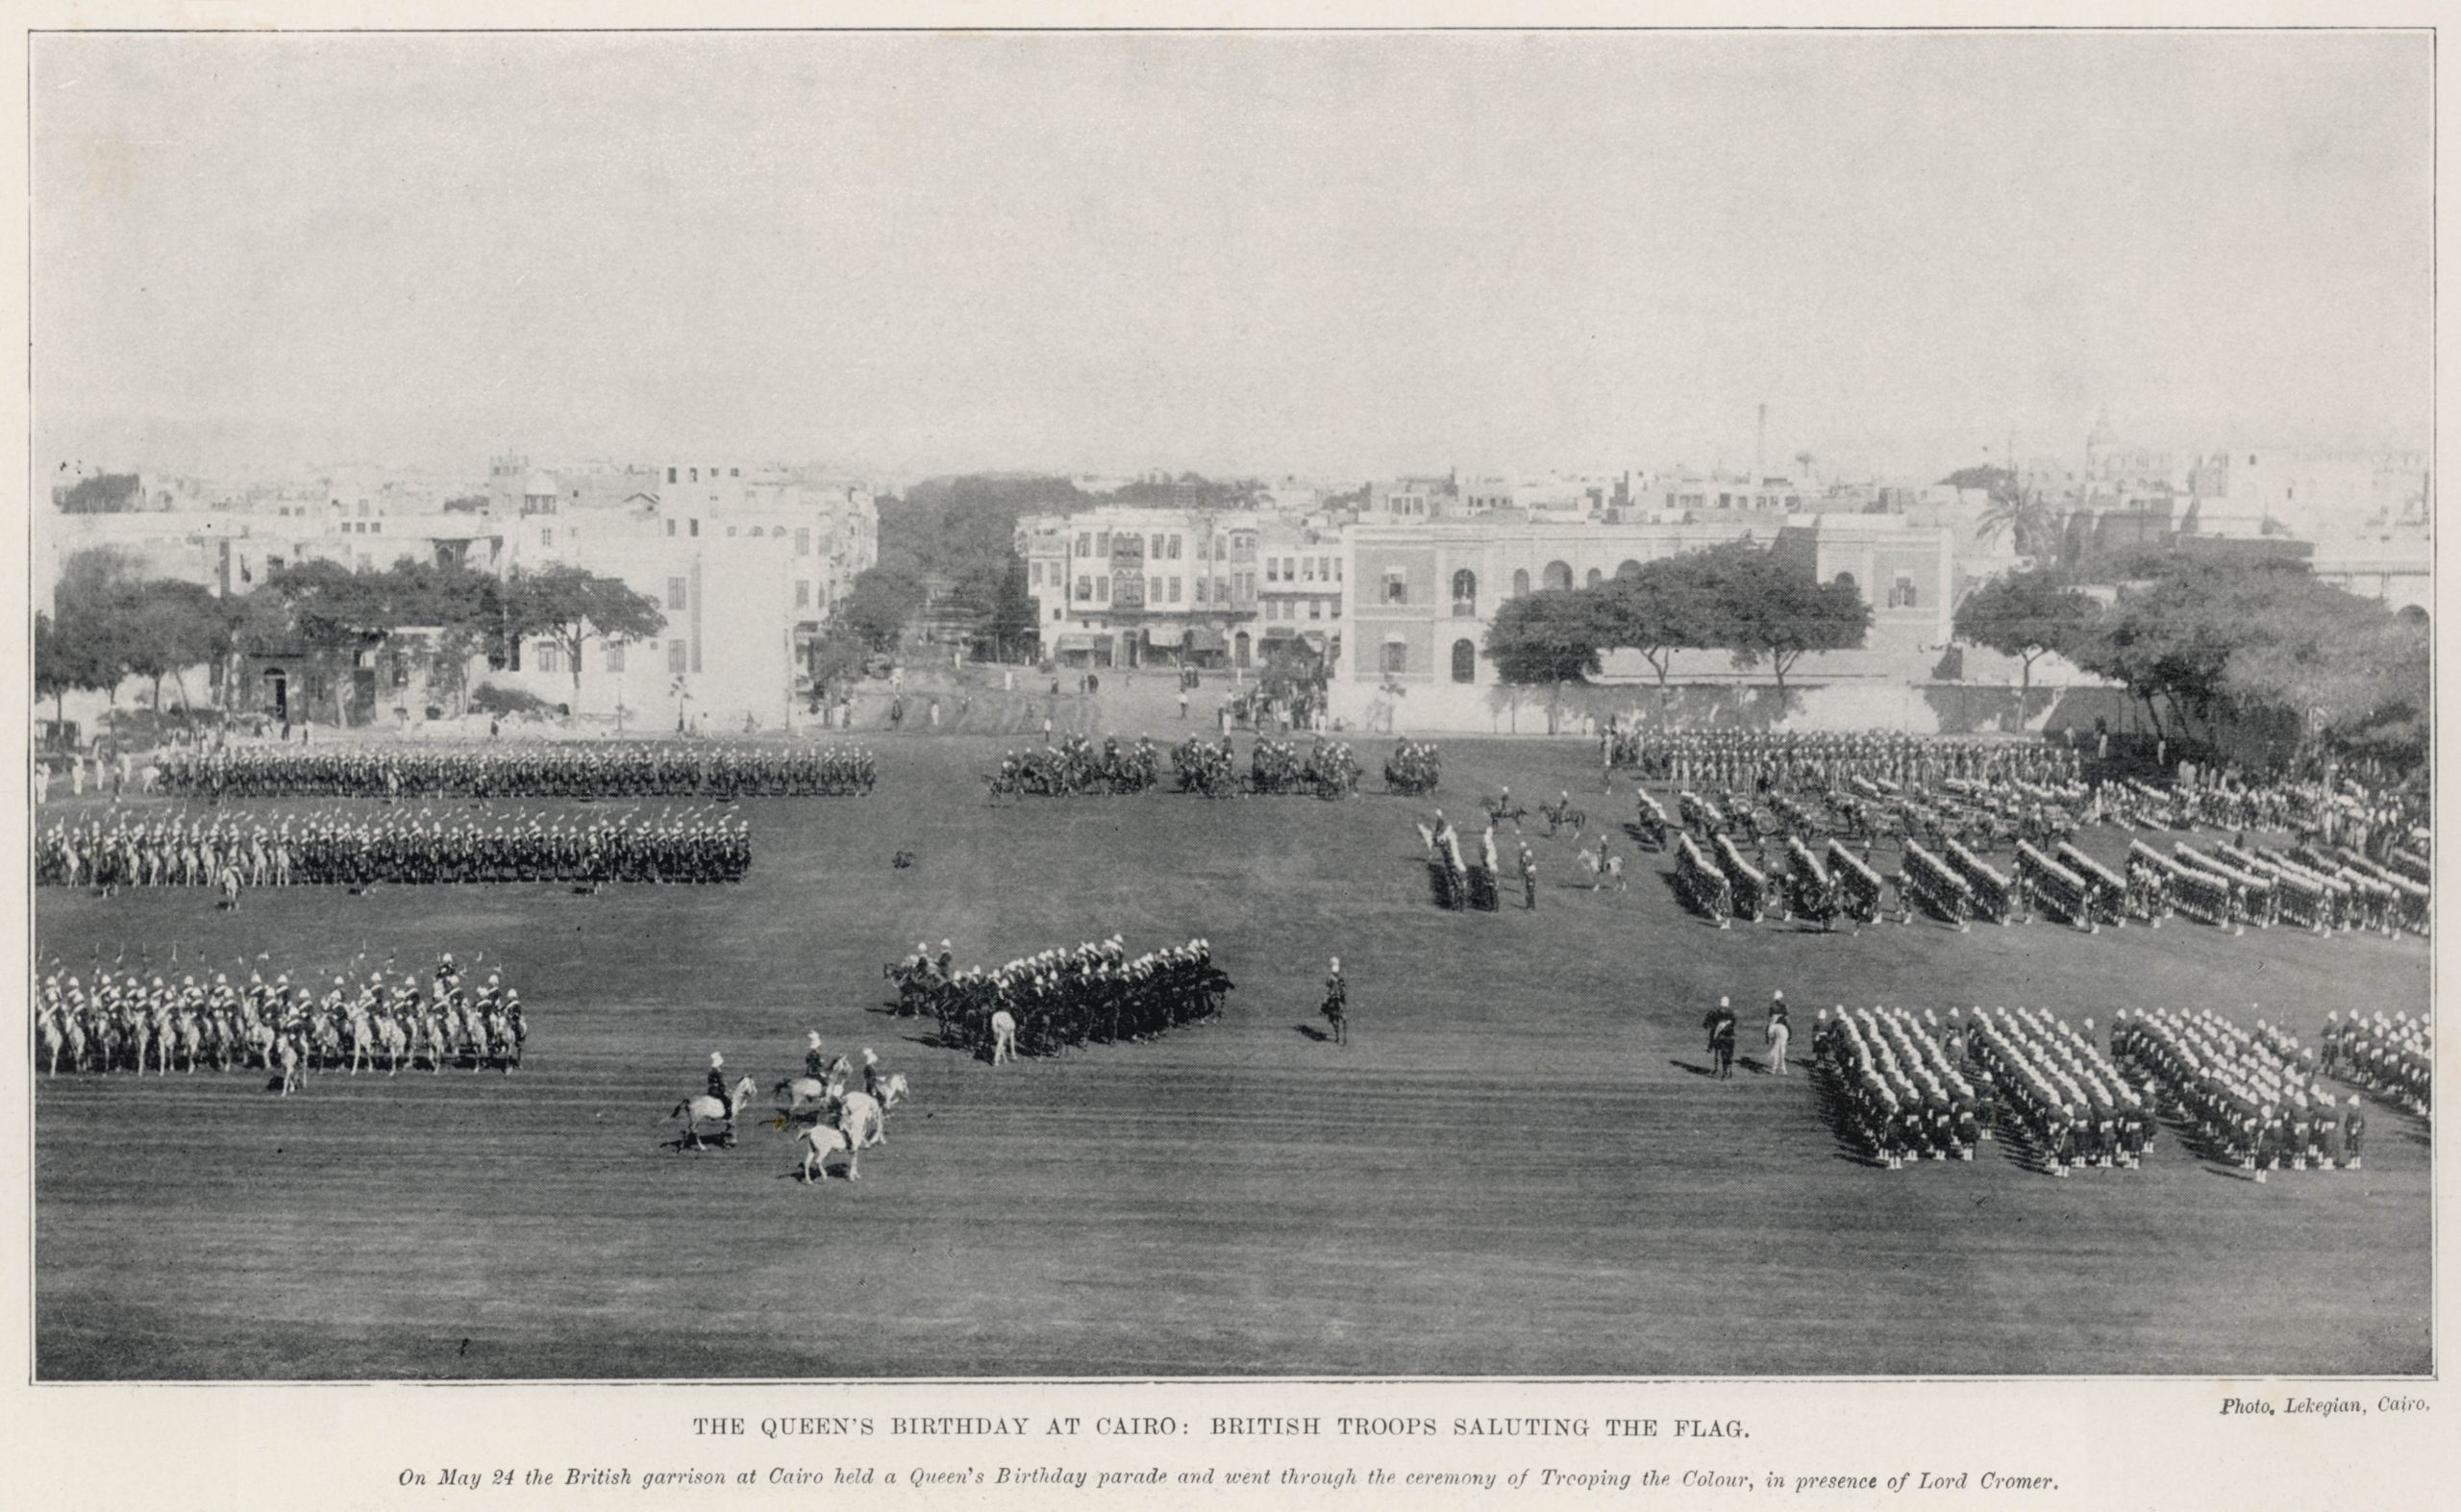 British Troops Saluting the Flag During the Queen's Birthday Celebrations in Cairo